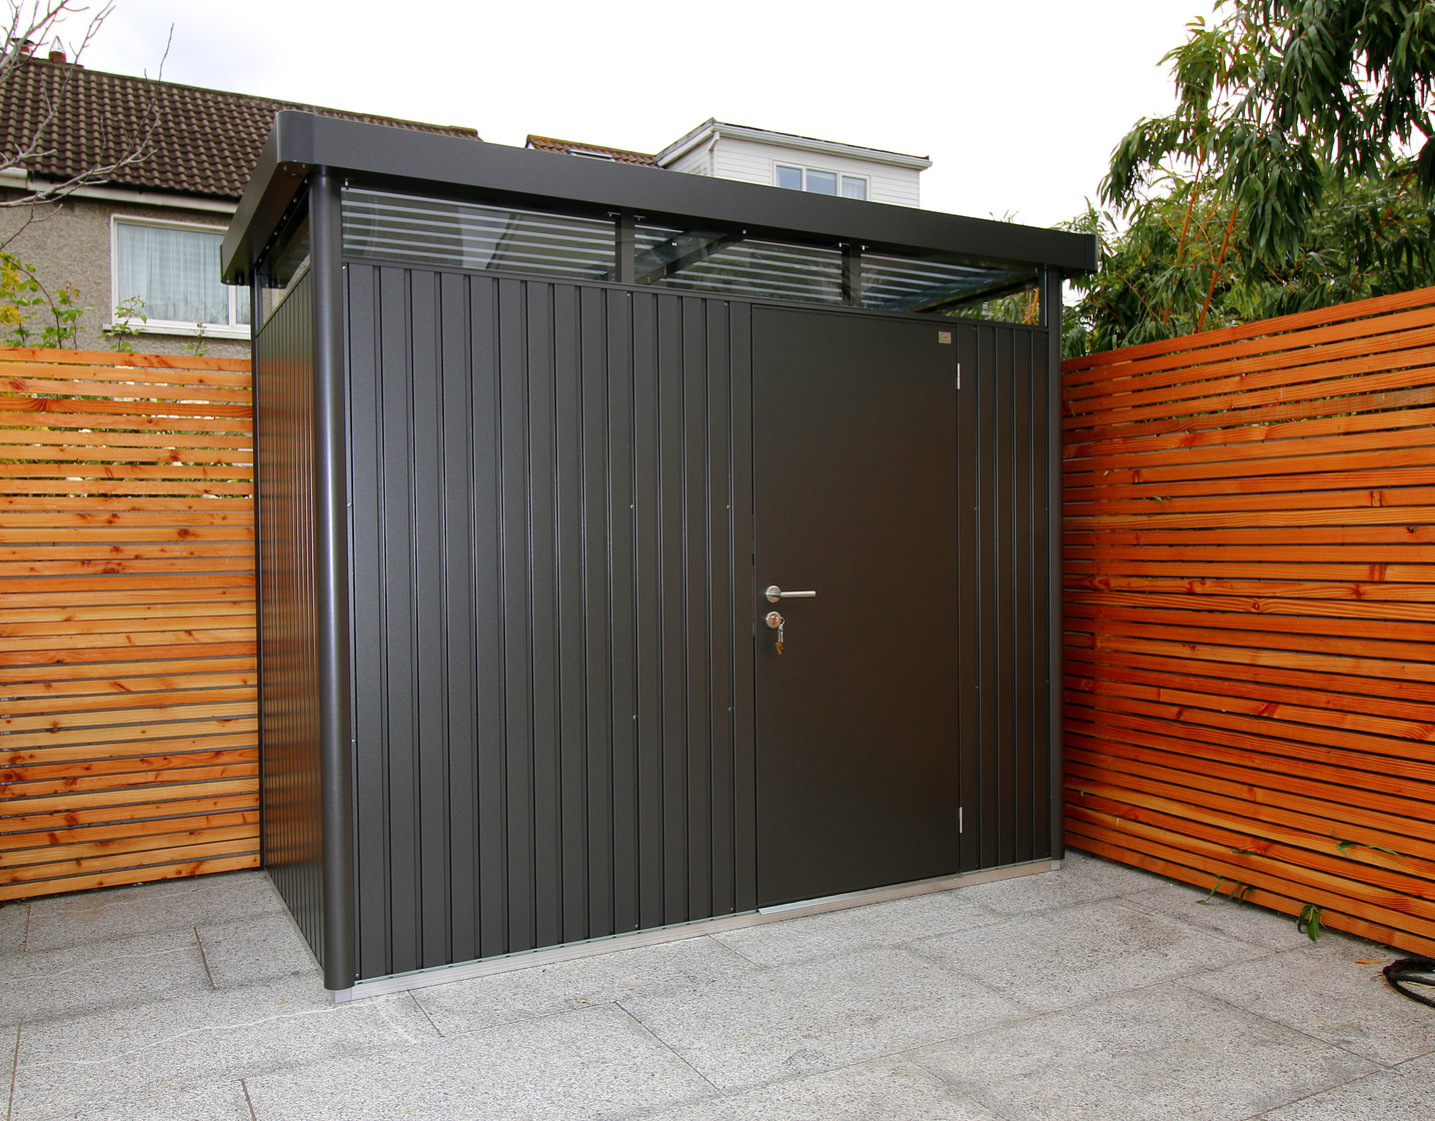 The Biohort HighLine H3 in metallic dark grey |  Supplied + Fitted in Dundrum, Dublin 16 by Owen Chubb